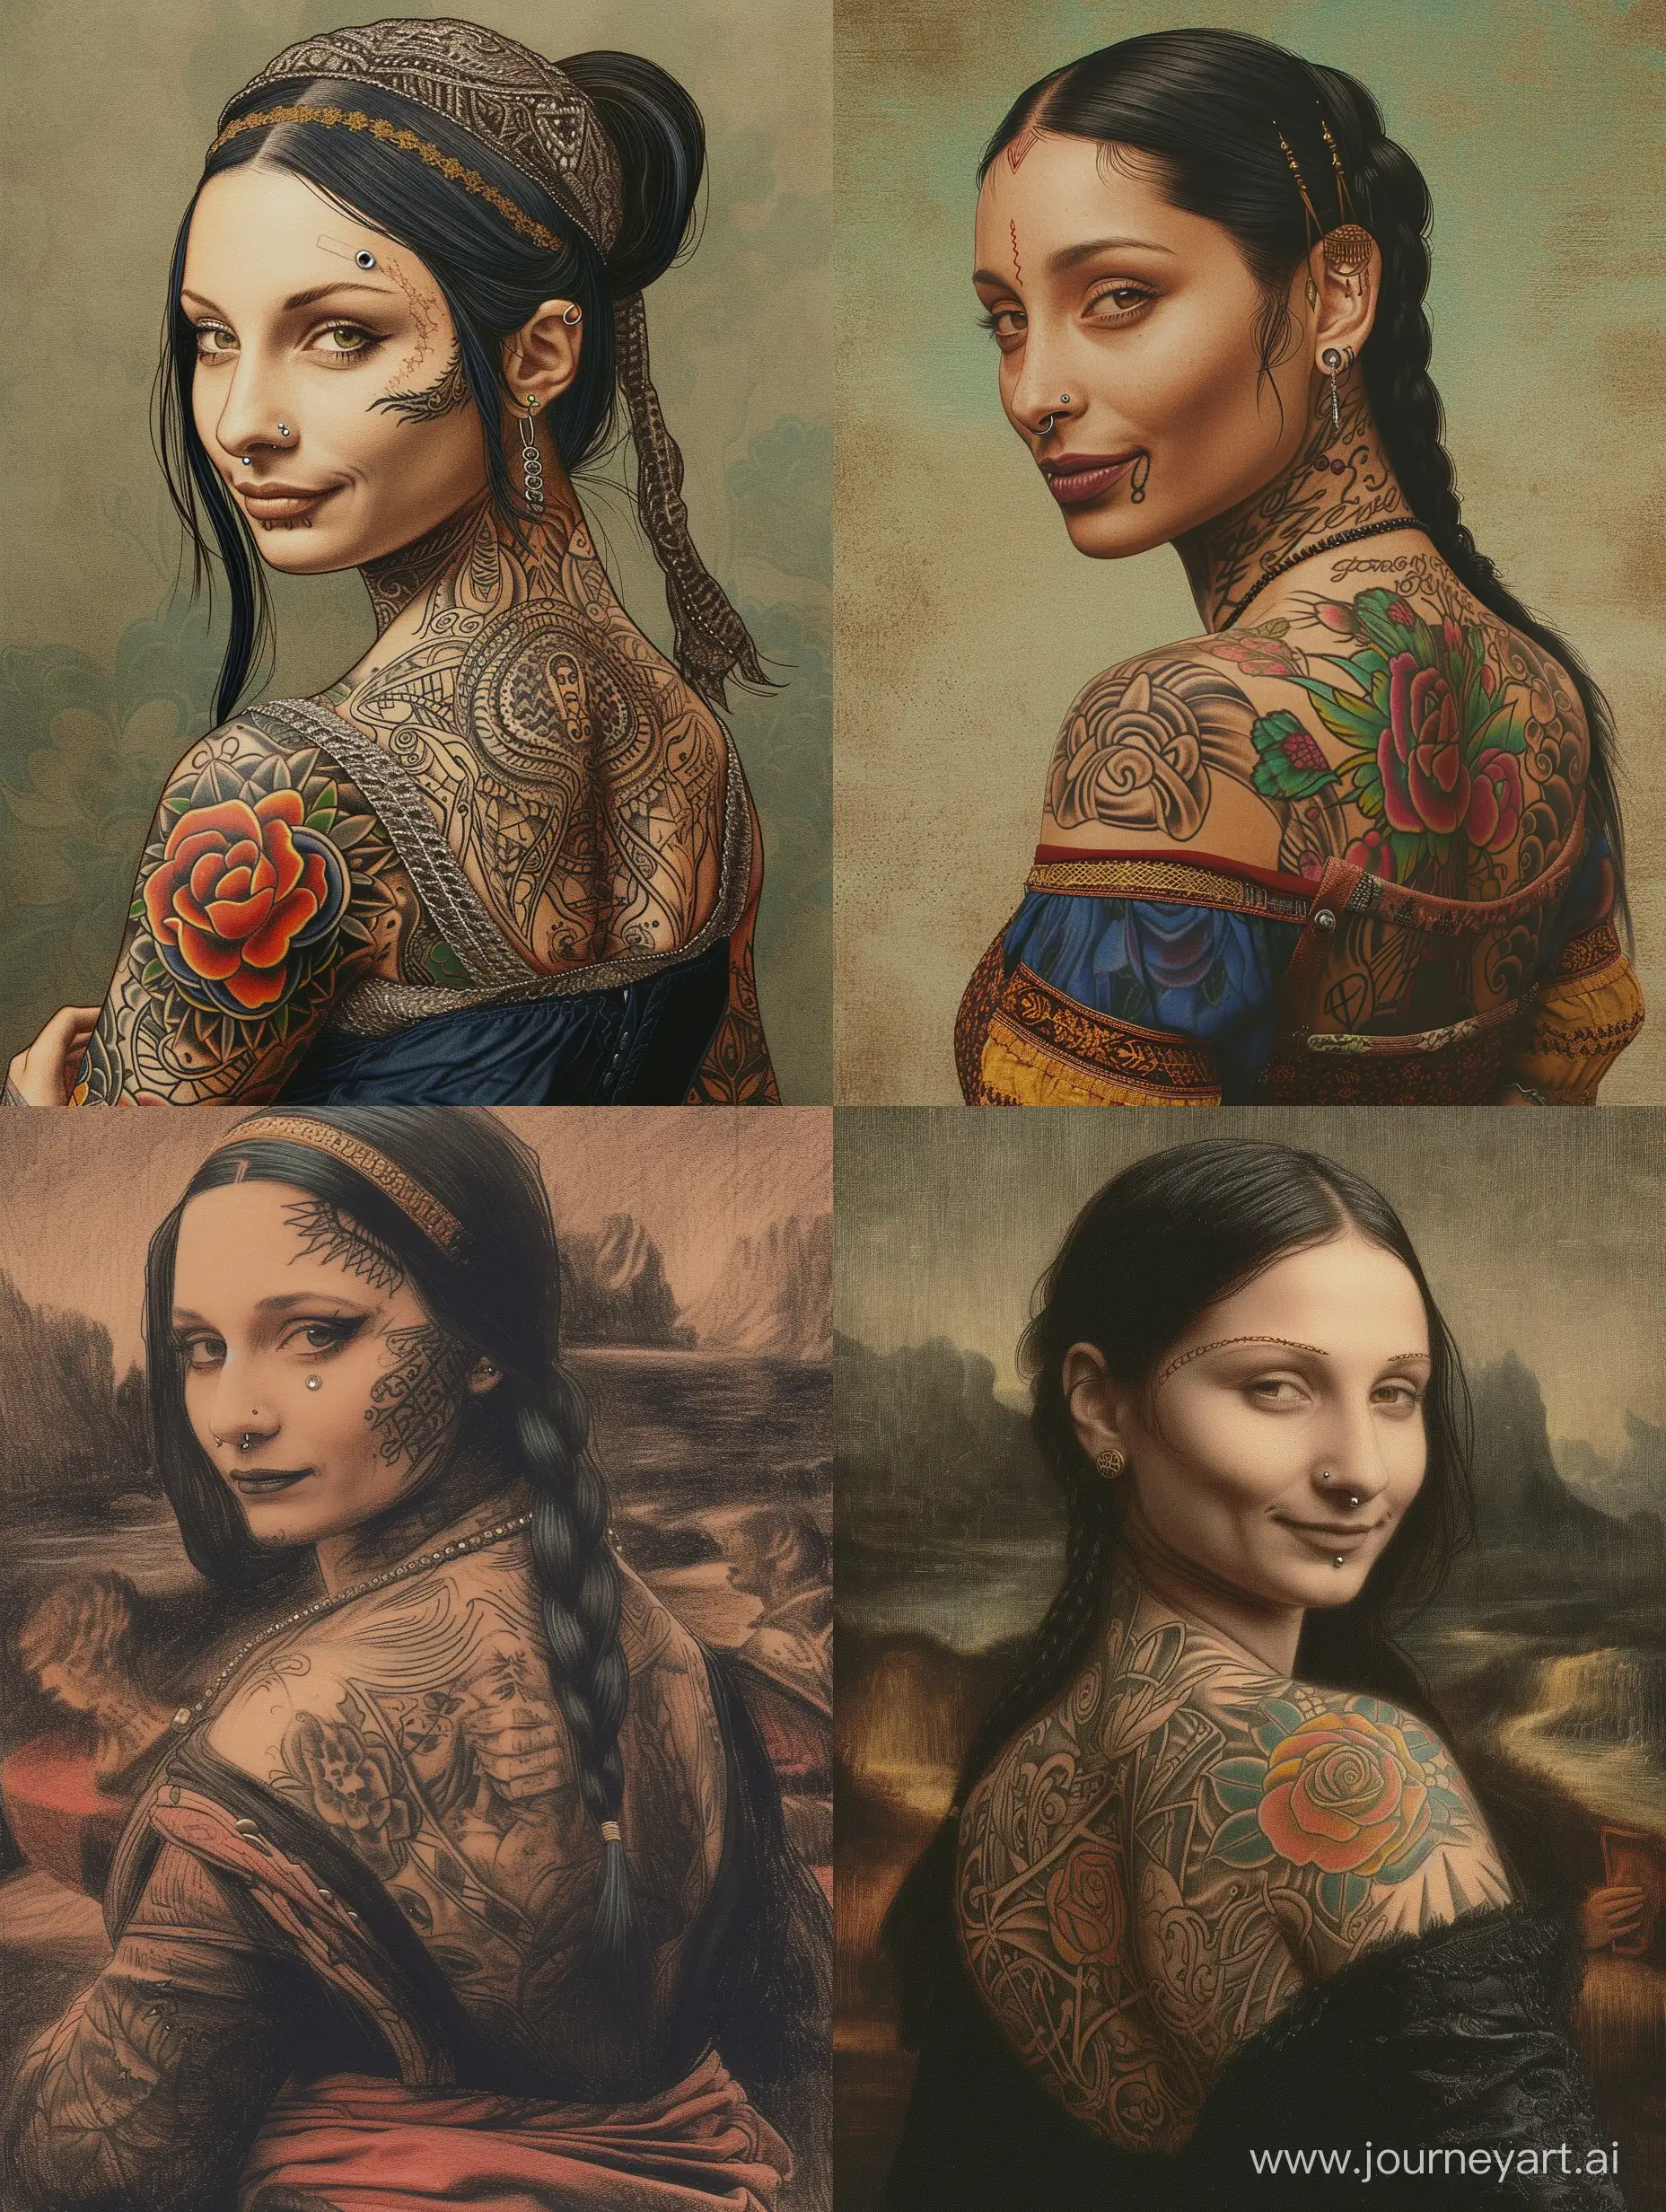 Generate an image of the Mona Lisa reimagined as a rebellious icon, with striking tattoos covering her back and shoulders. She wears a nose stud and eyebrow piercing, challenging traditional notions of beauty while retaining her timeless elegance.